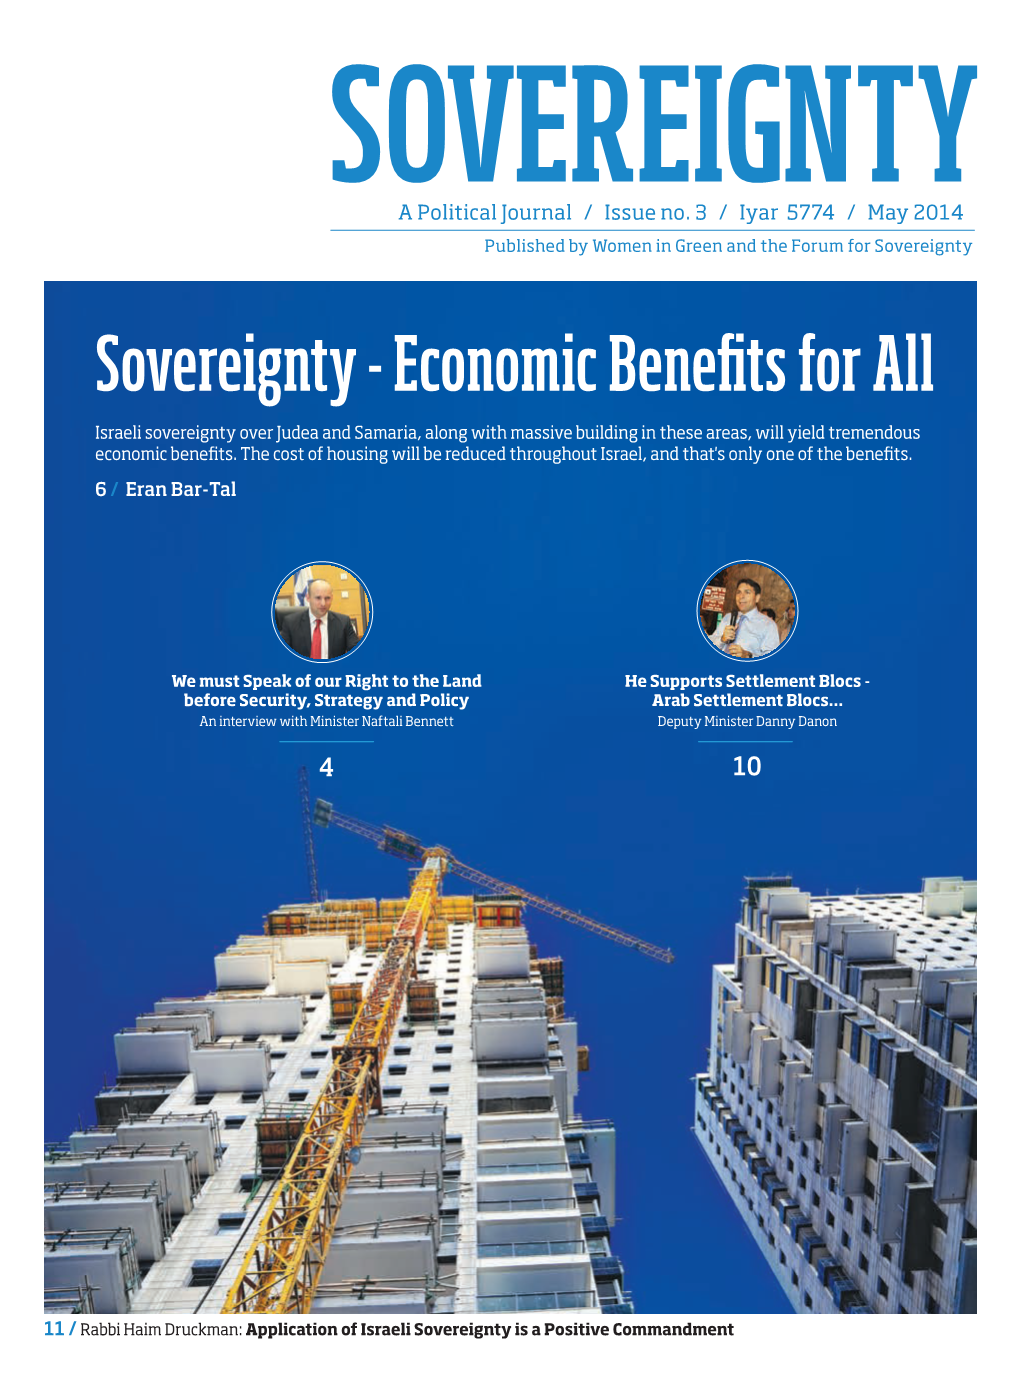 SOVEREIGNTY a Political Journal / Issue No